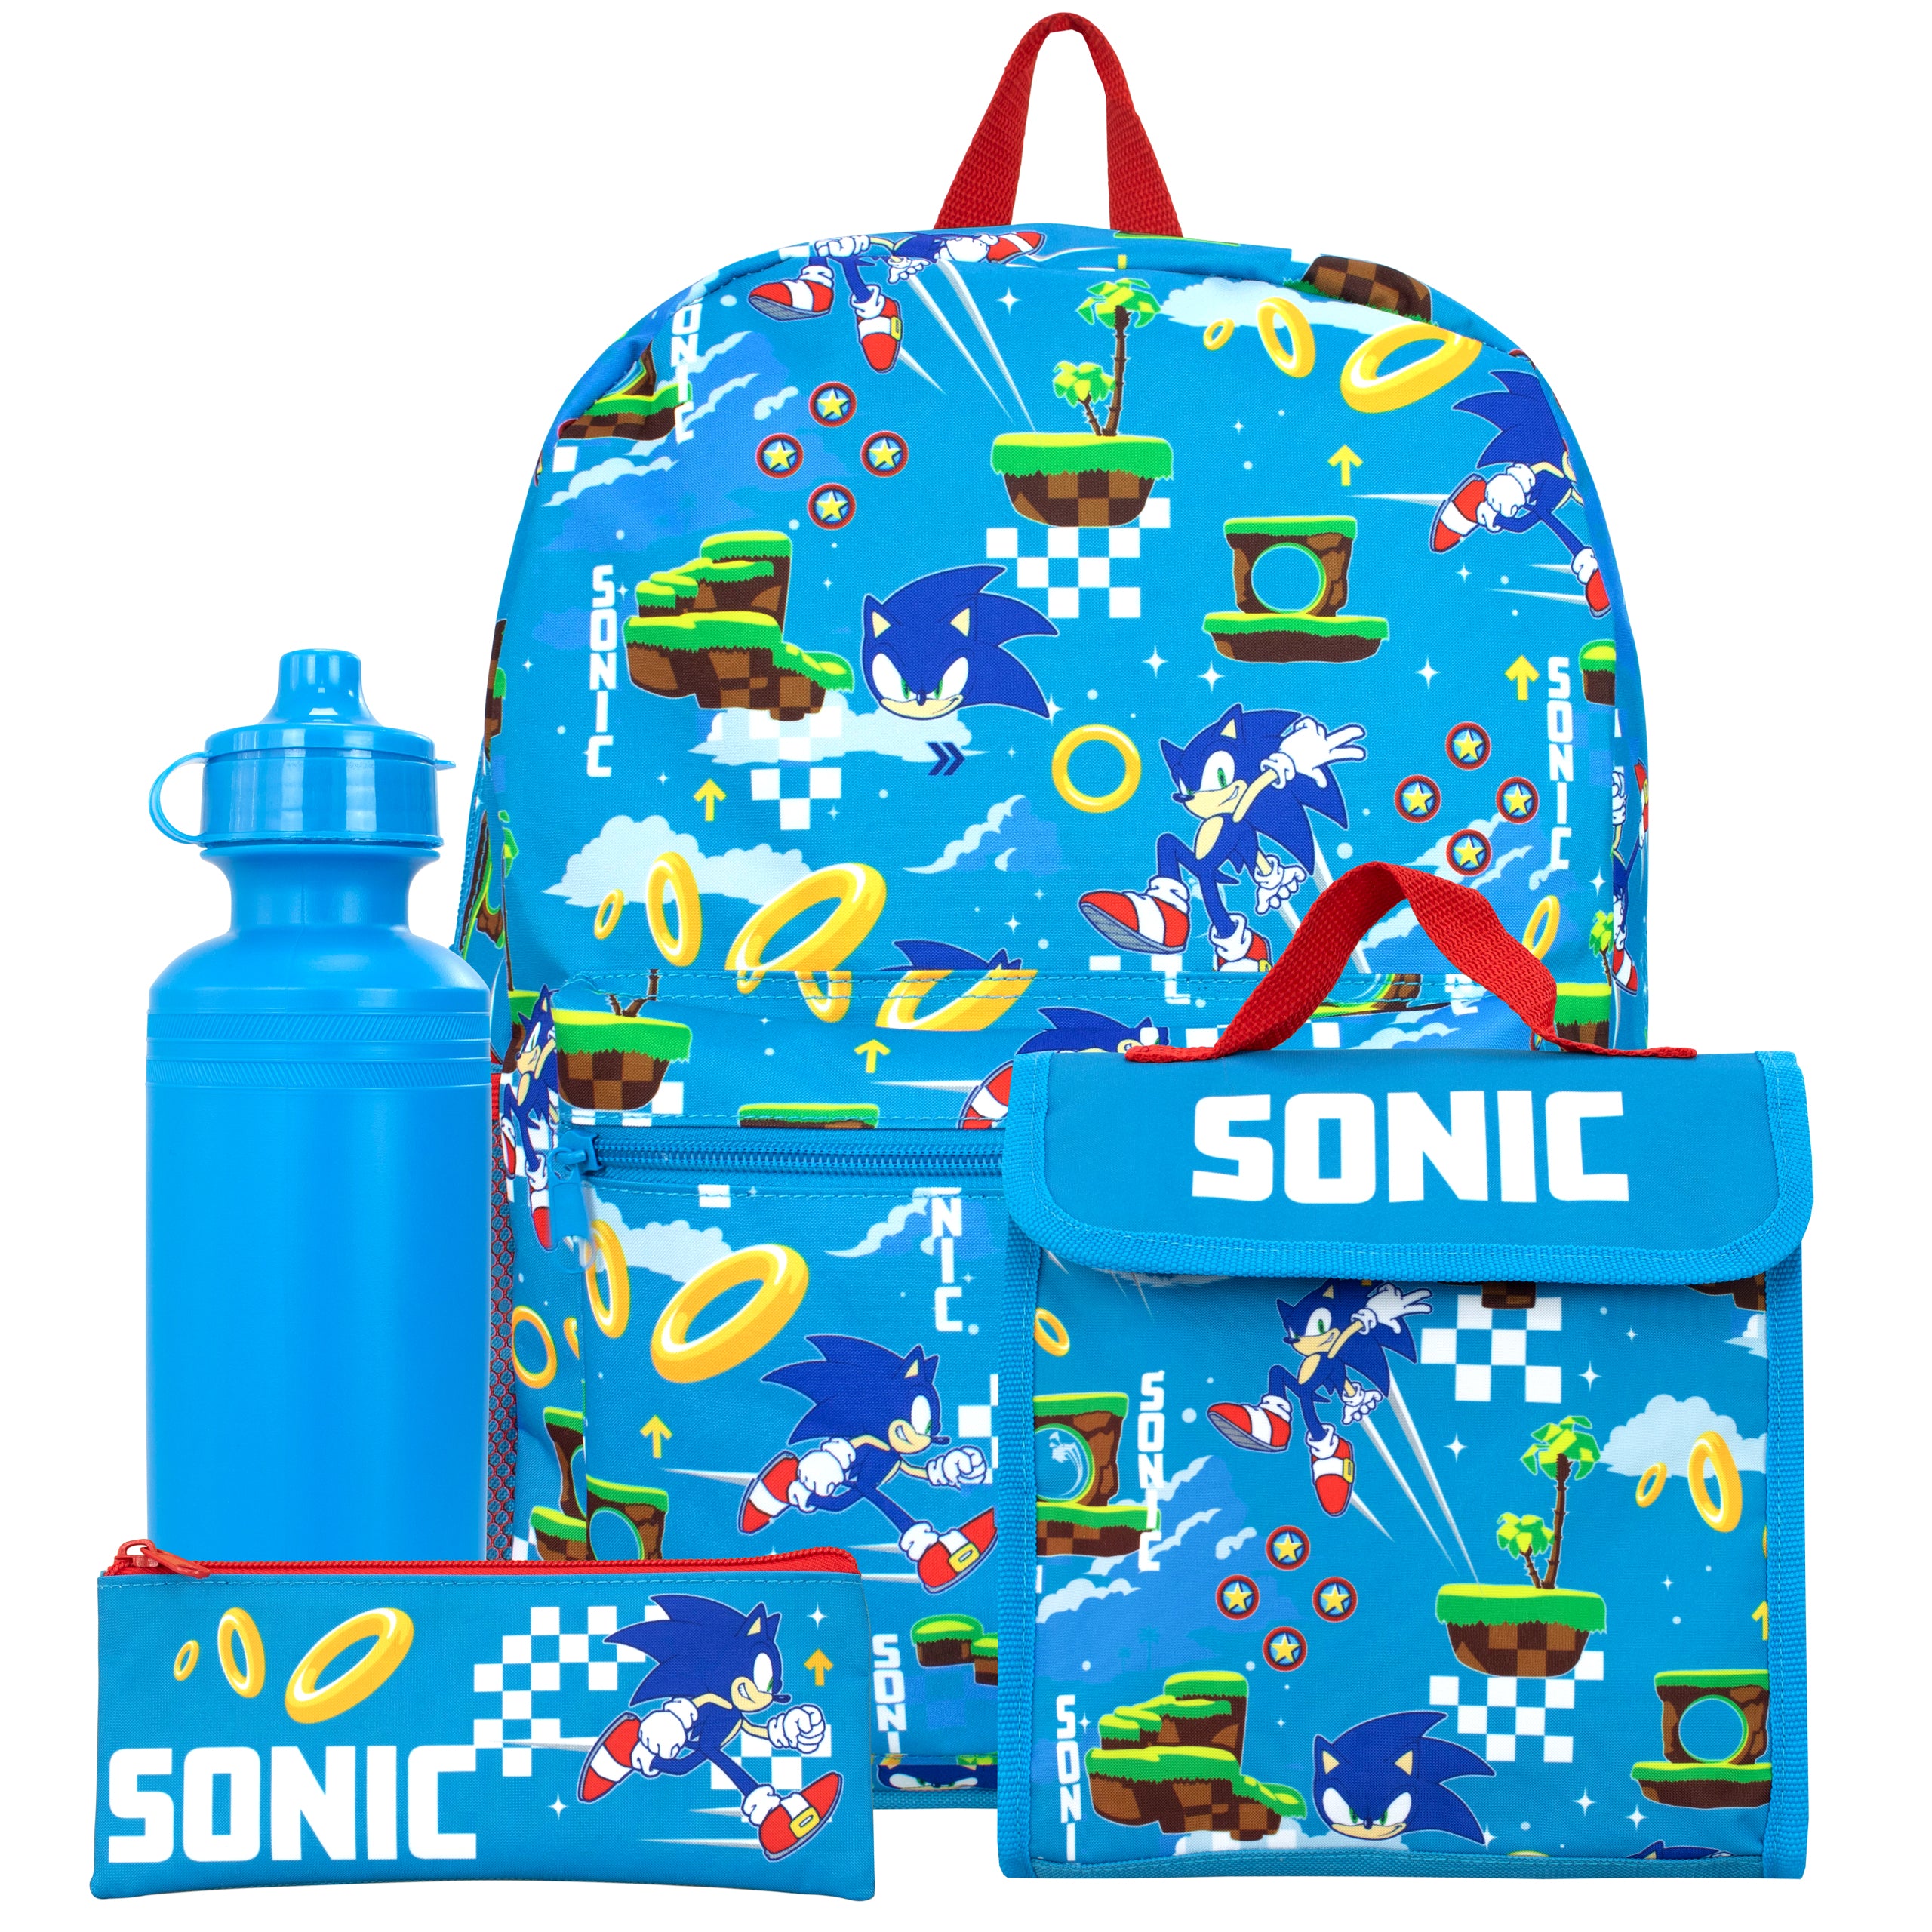 Sonic The Hedgehog Lunch Box (40574) - Character Brands